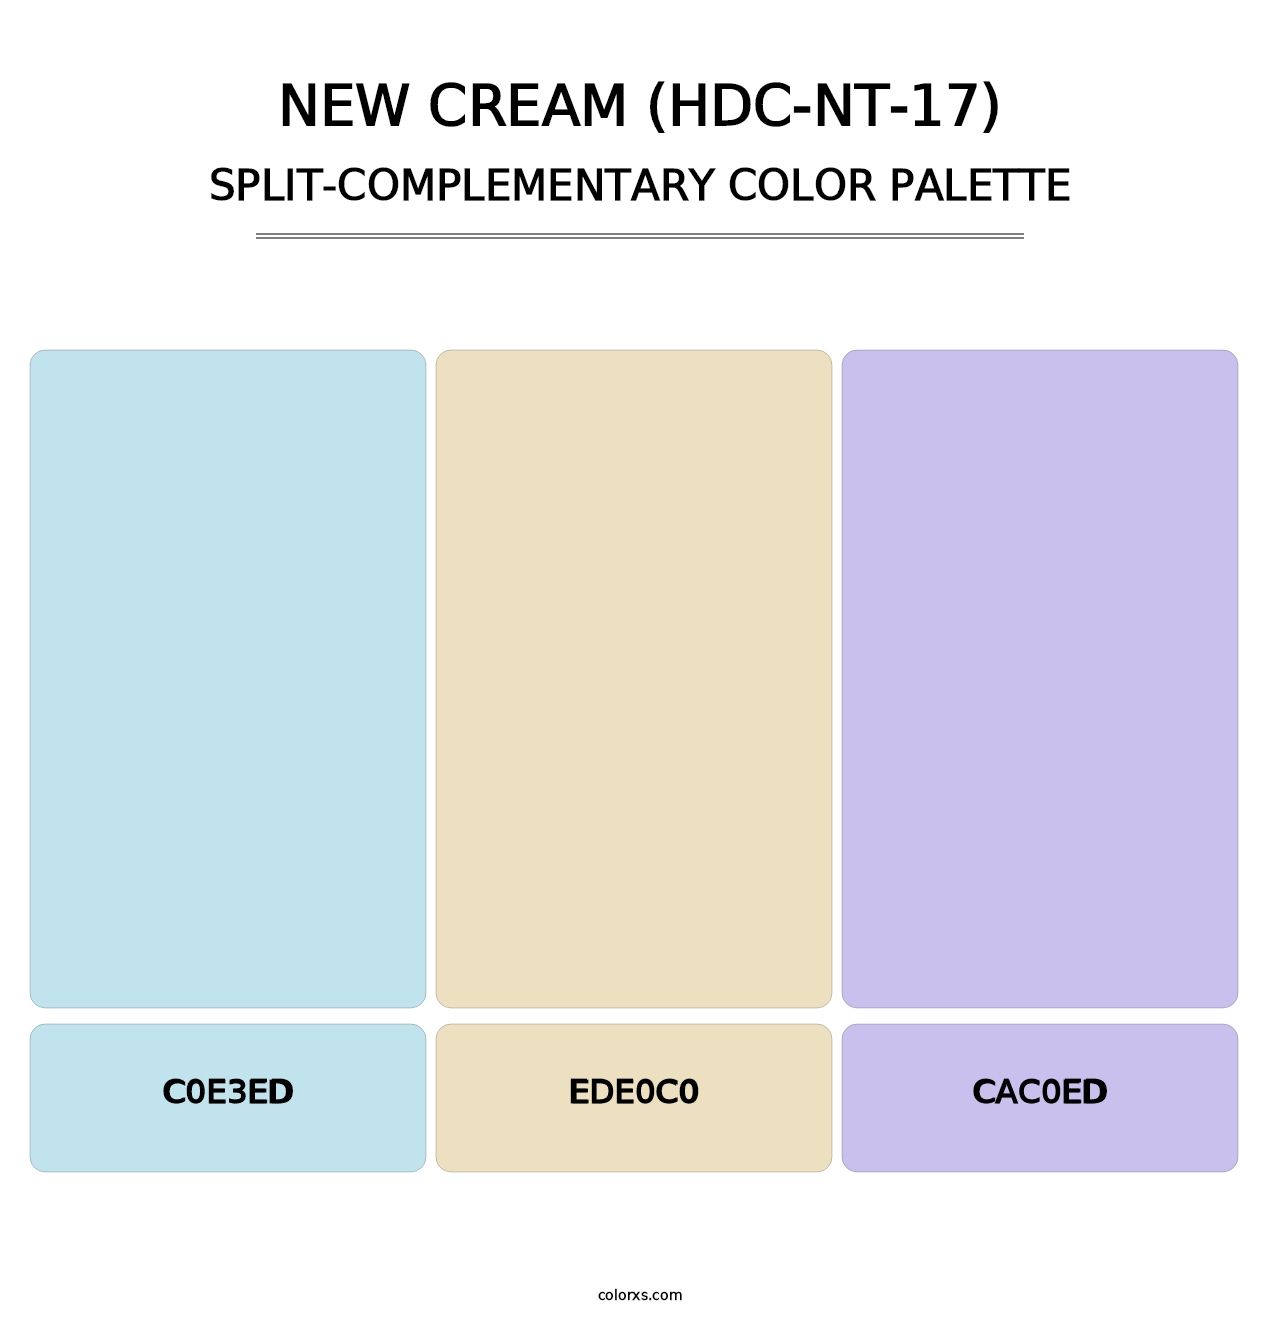 New Cream (HDC-NT-17) - Split-Complementary Color Palette